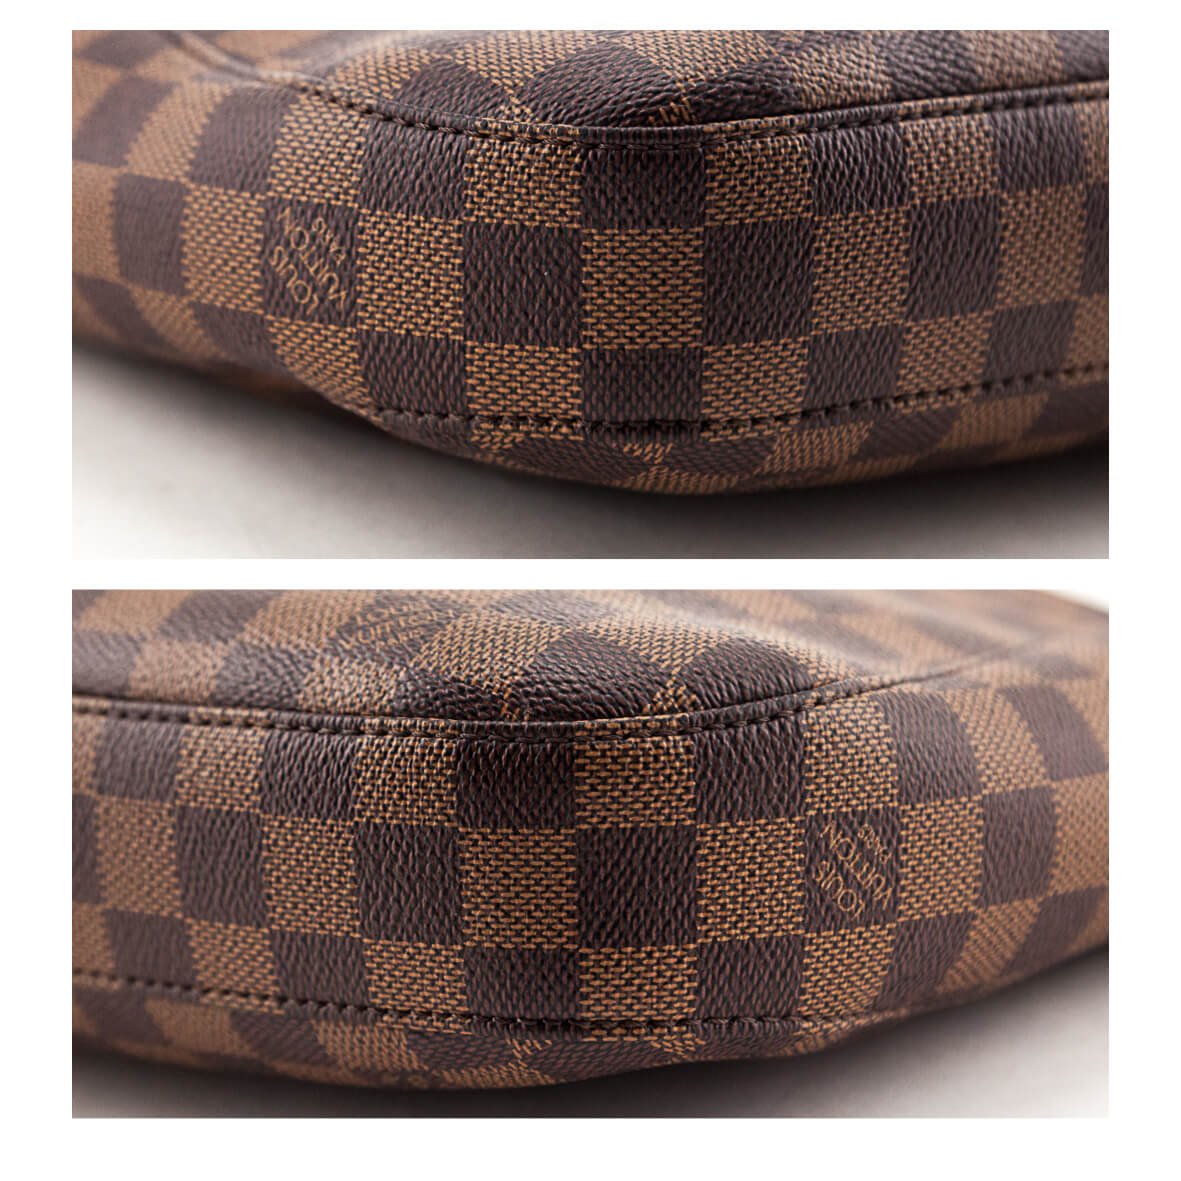 LOUIS VUITTON Damier Ebene South Bank Besace - clothing & accessories - by  owner - apparel sale - craigslist